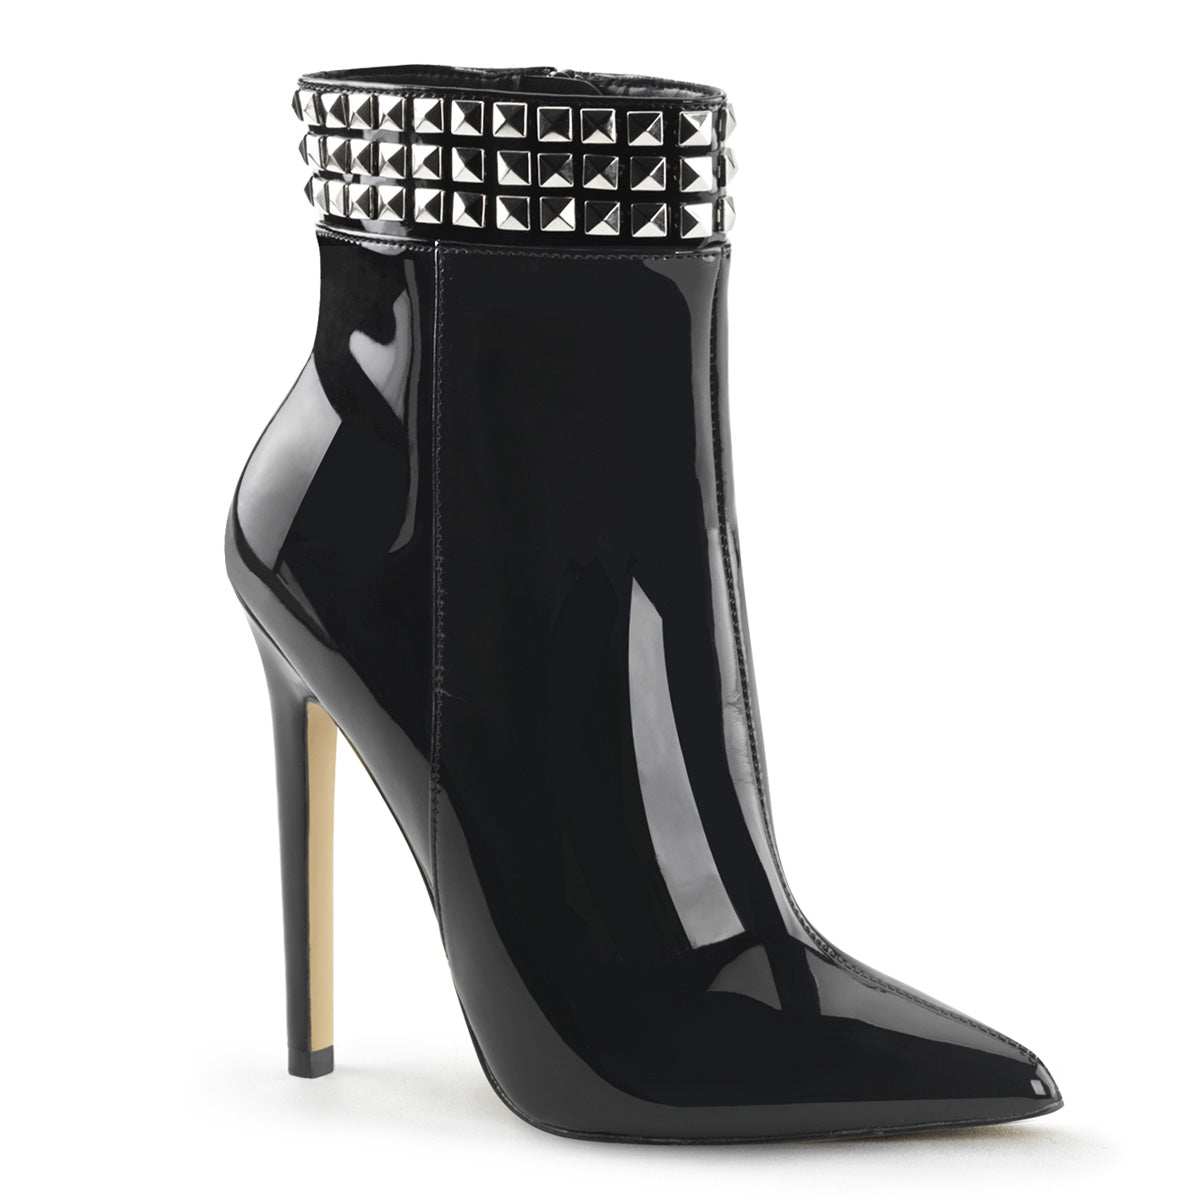 SEXY-1006 Black Studded Ankle Boots